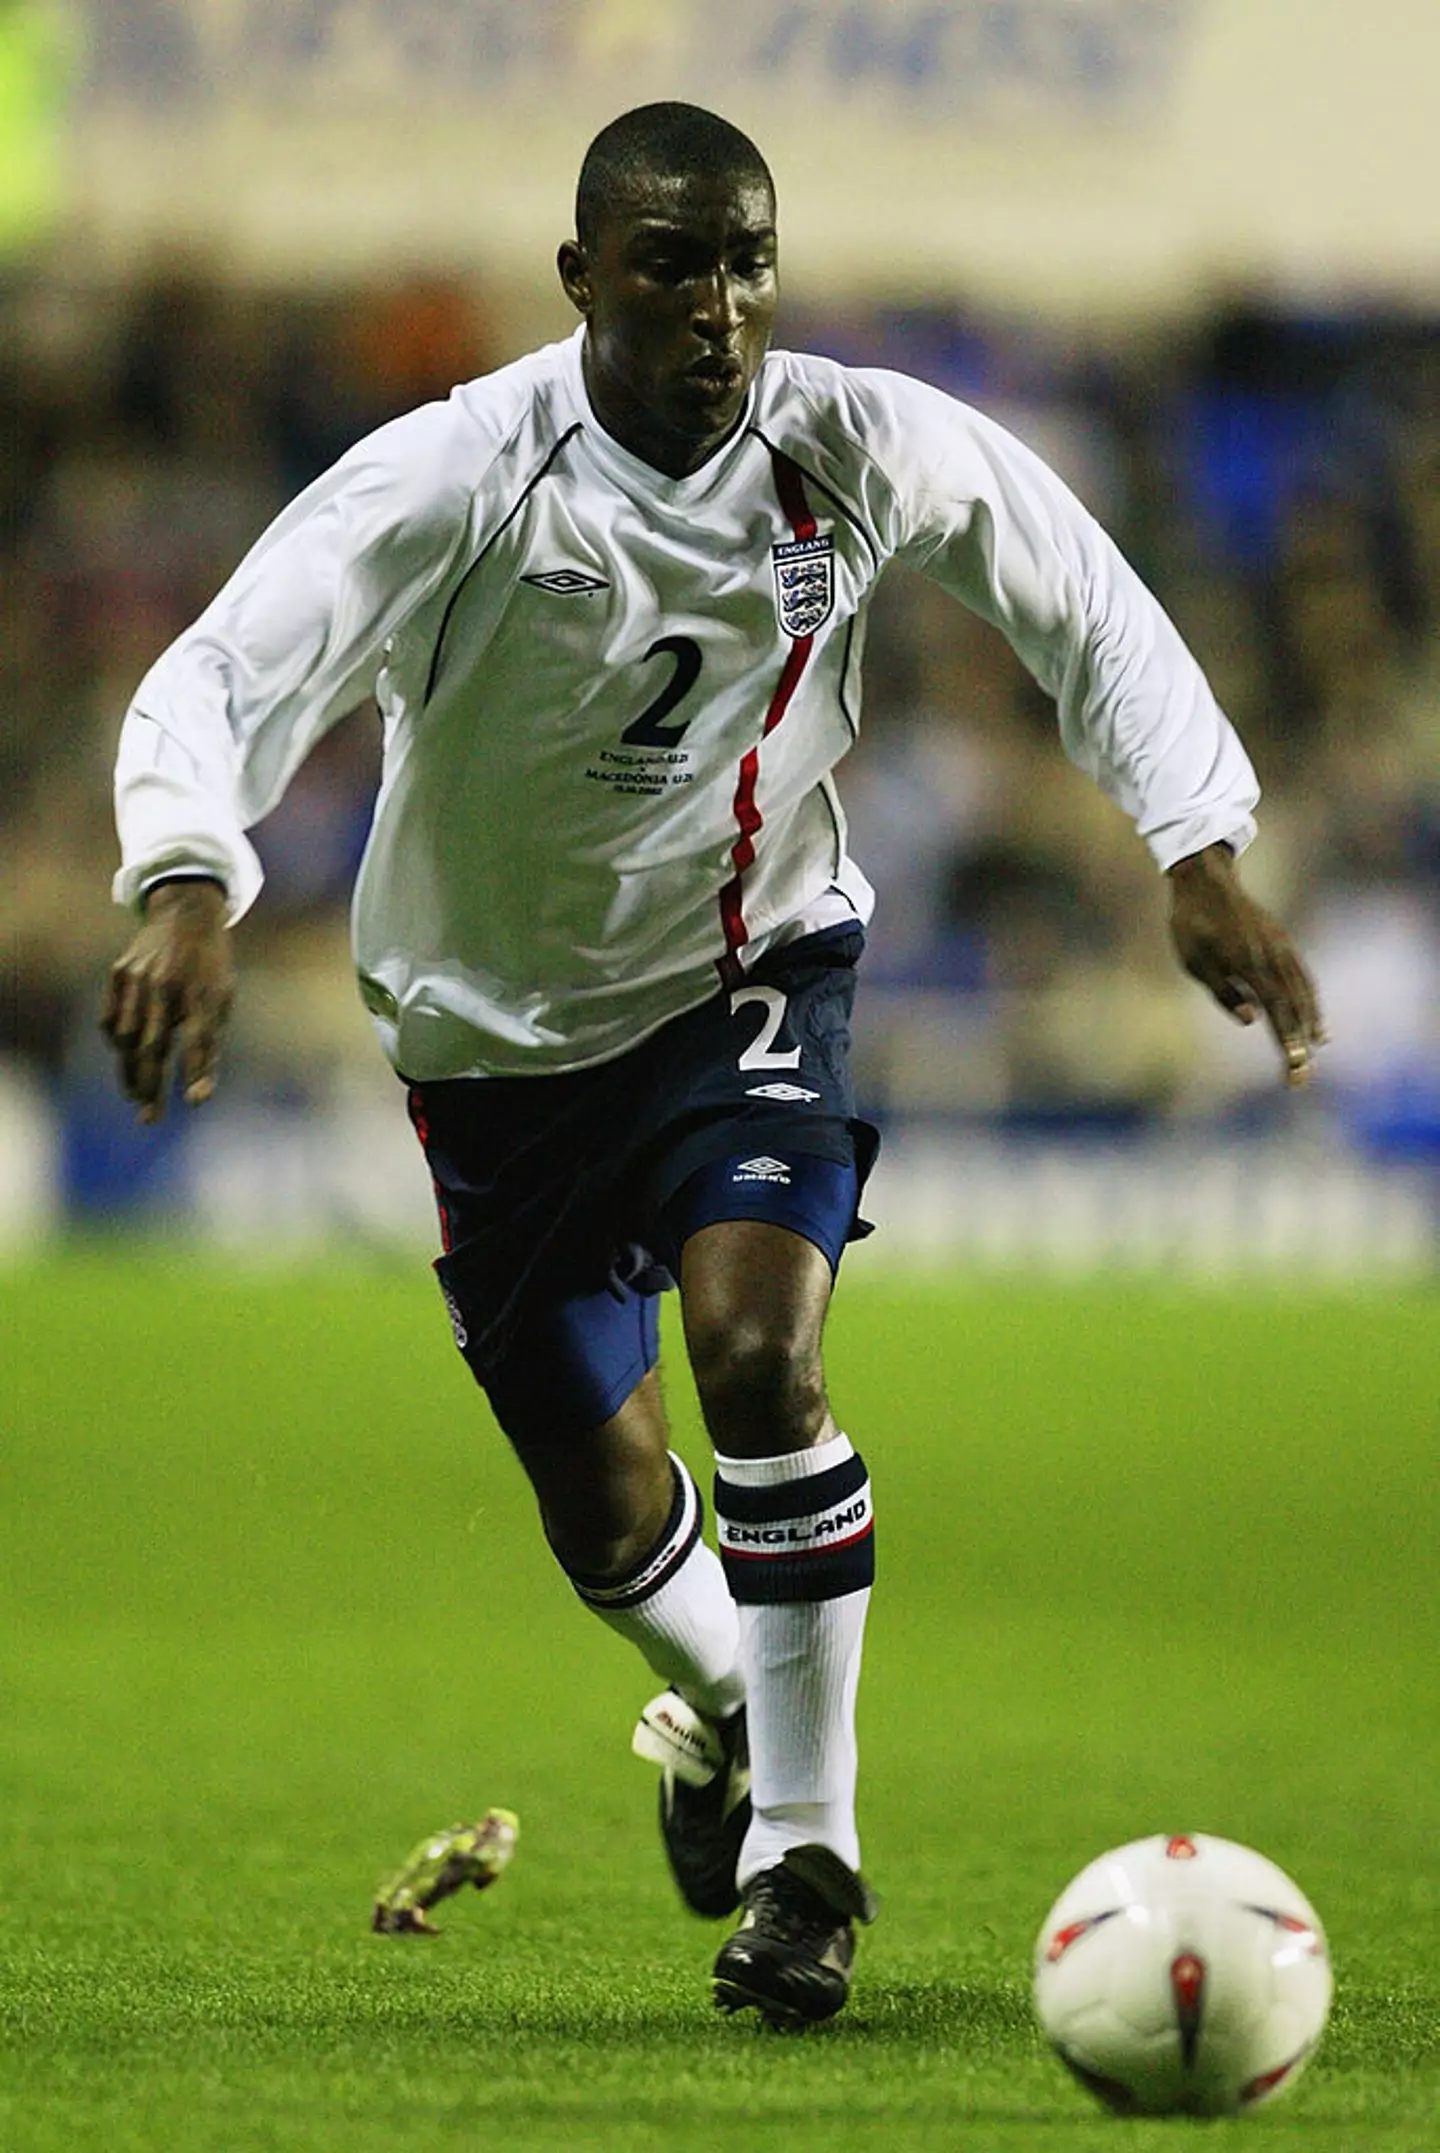 Jlloyd Samuel passed away in 2018 (Phil Cole/Getty Images)